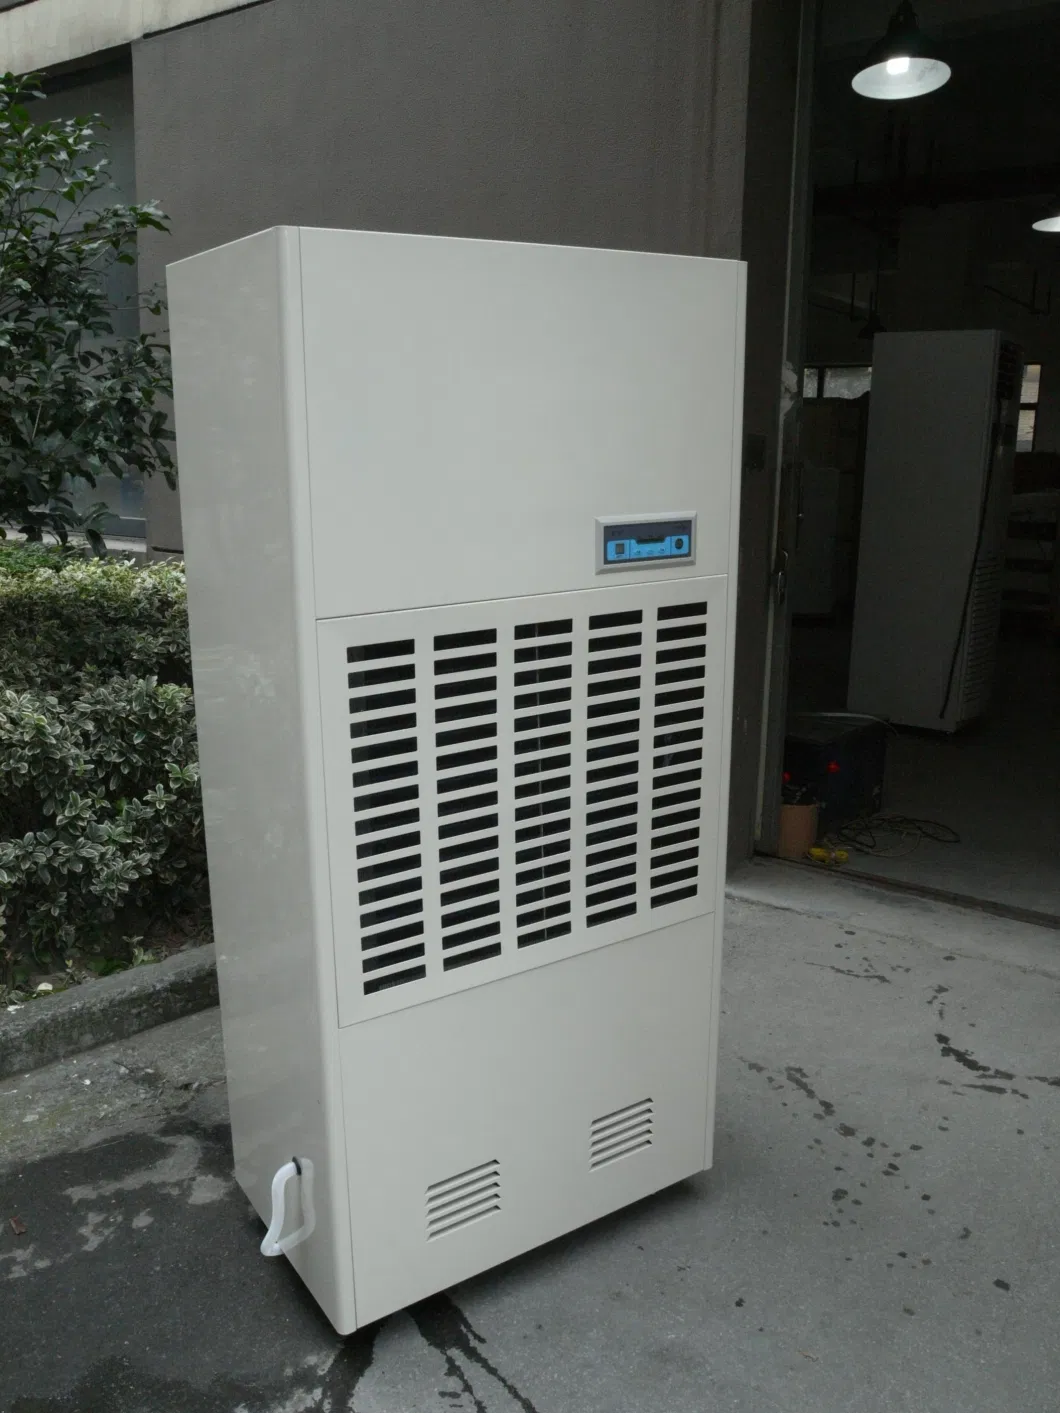 OEM Stainless Steel Shell Dehumidifier Industrial Commerial Dehumidifier